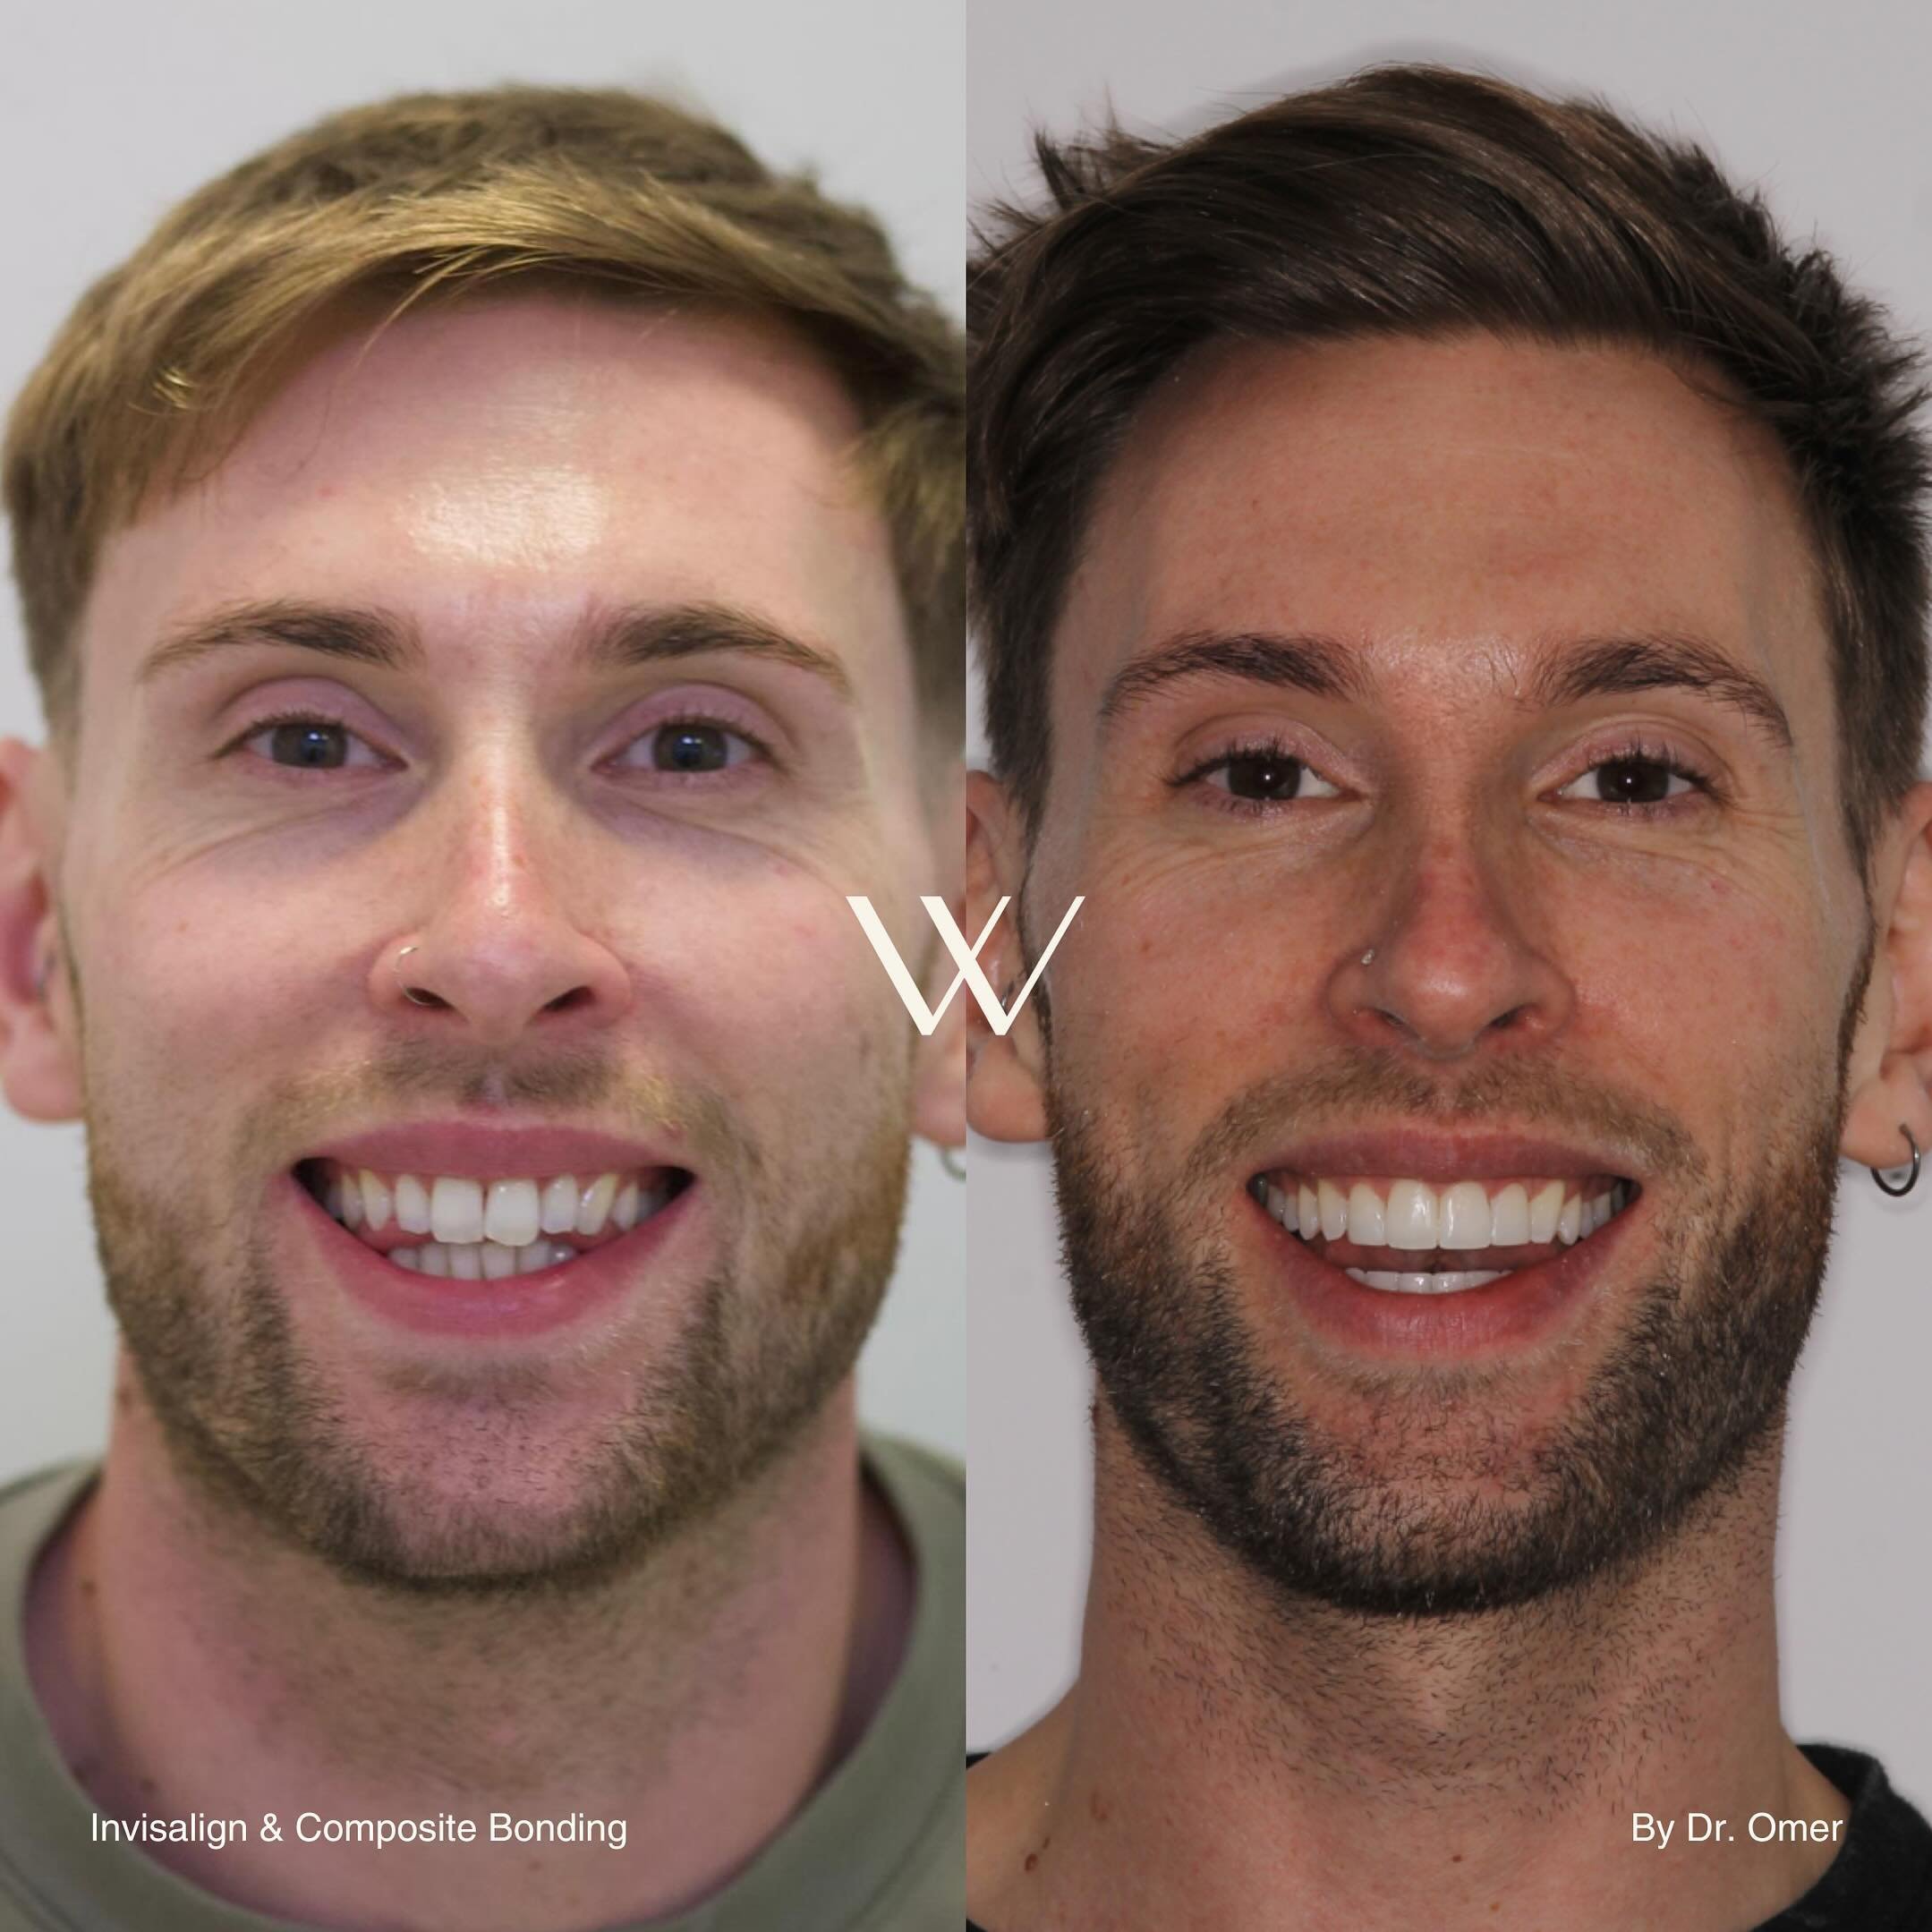 Witness the power of a smile makeover! 🦷✨ @omer_ortho  expertise shines through in this remarkable transformation achieved with Invisalign and perfected with composite bonding. Ready to transform your smile? Book your FREE consultation today! #Smile